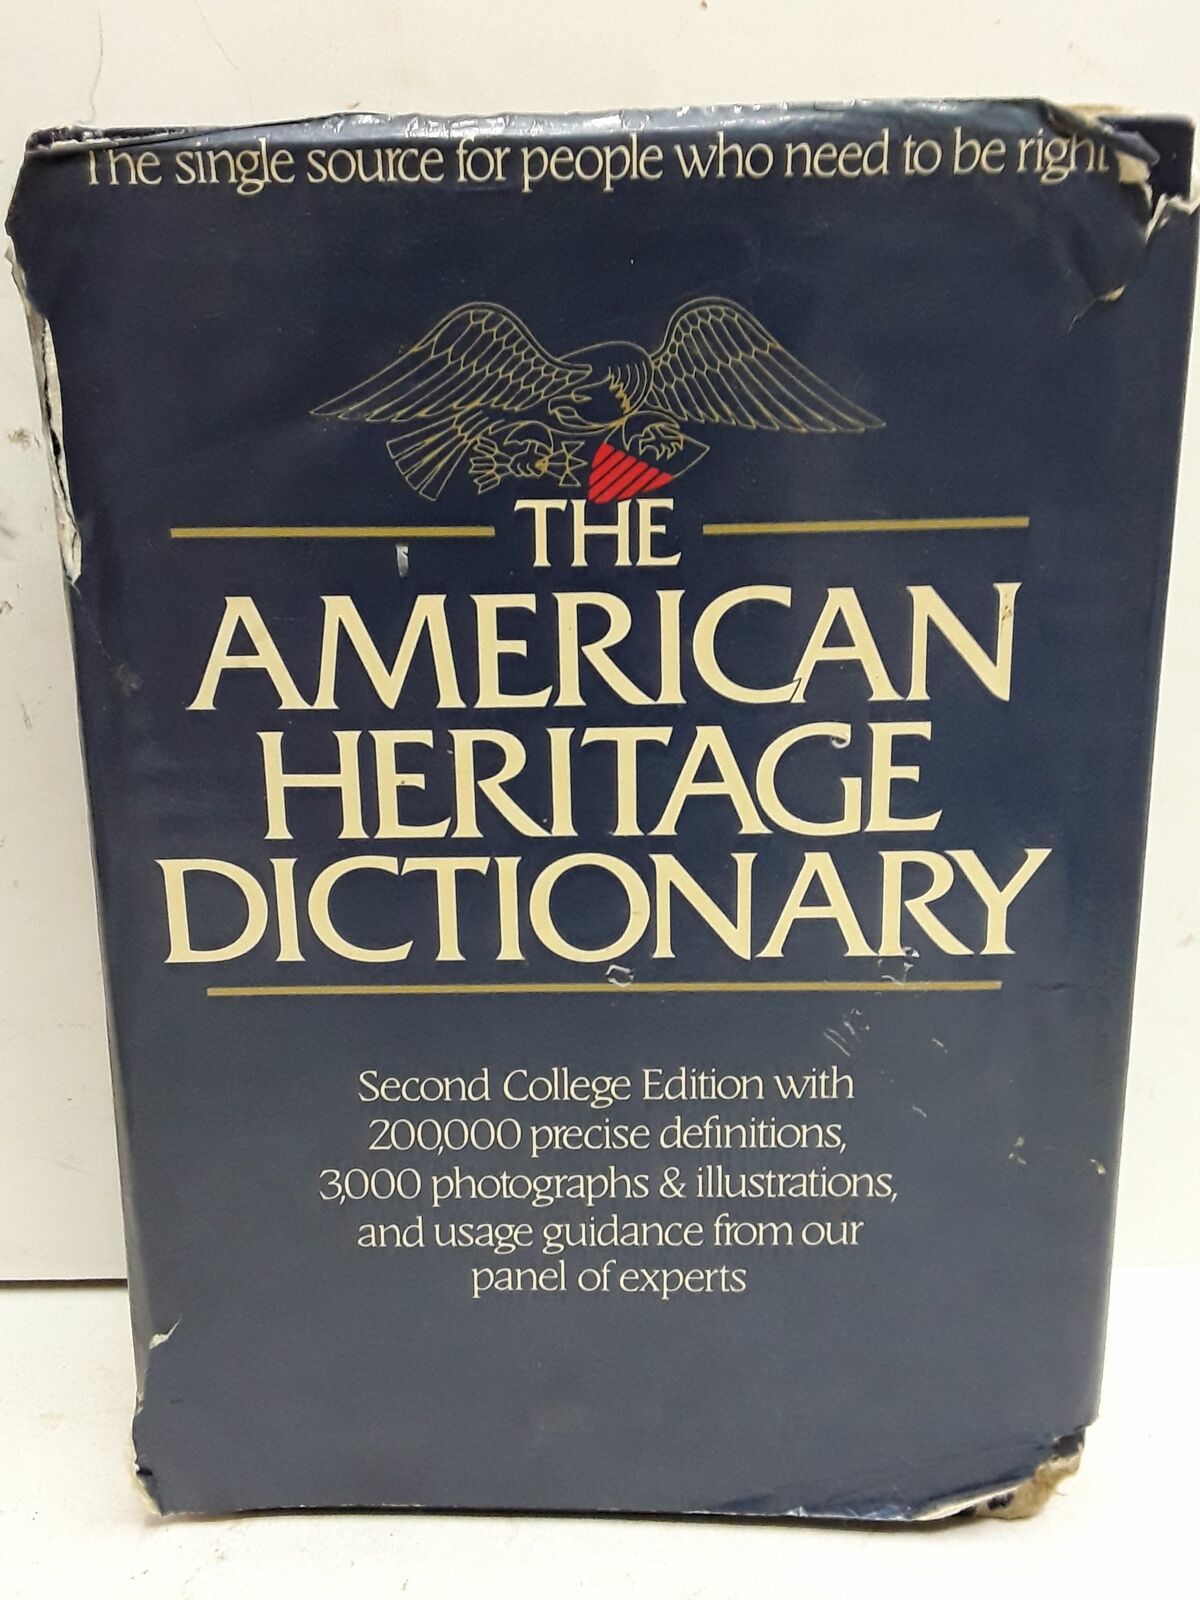 American Heritage Dictionary. American Heritage Dictionary 5 Edition. The American Heritage Dictionary of the English language книга купить. American Heritage New Dictionary of Cultural Literacy,. Two dictionary